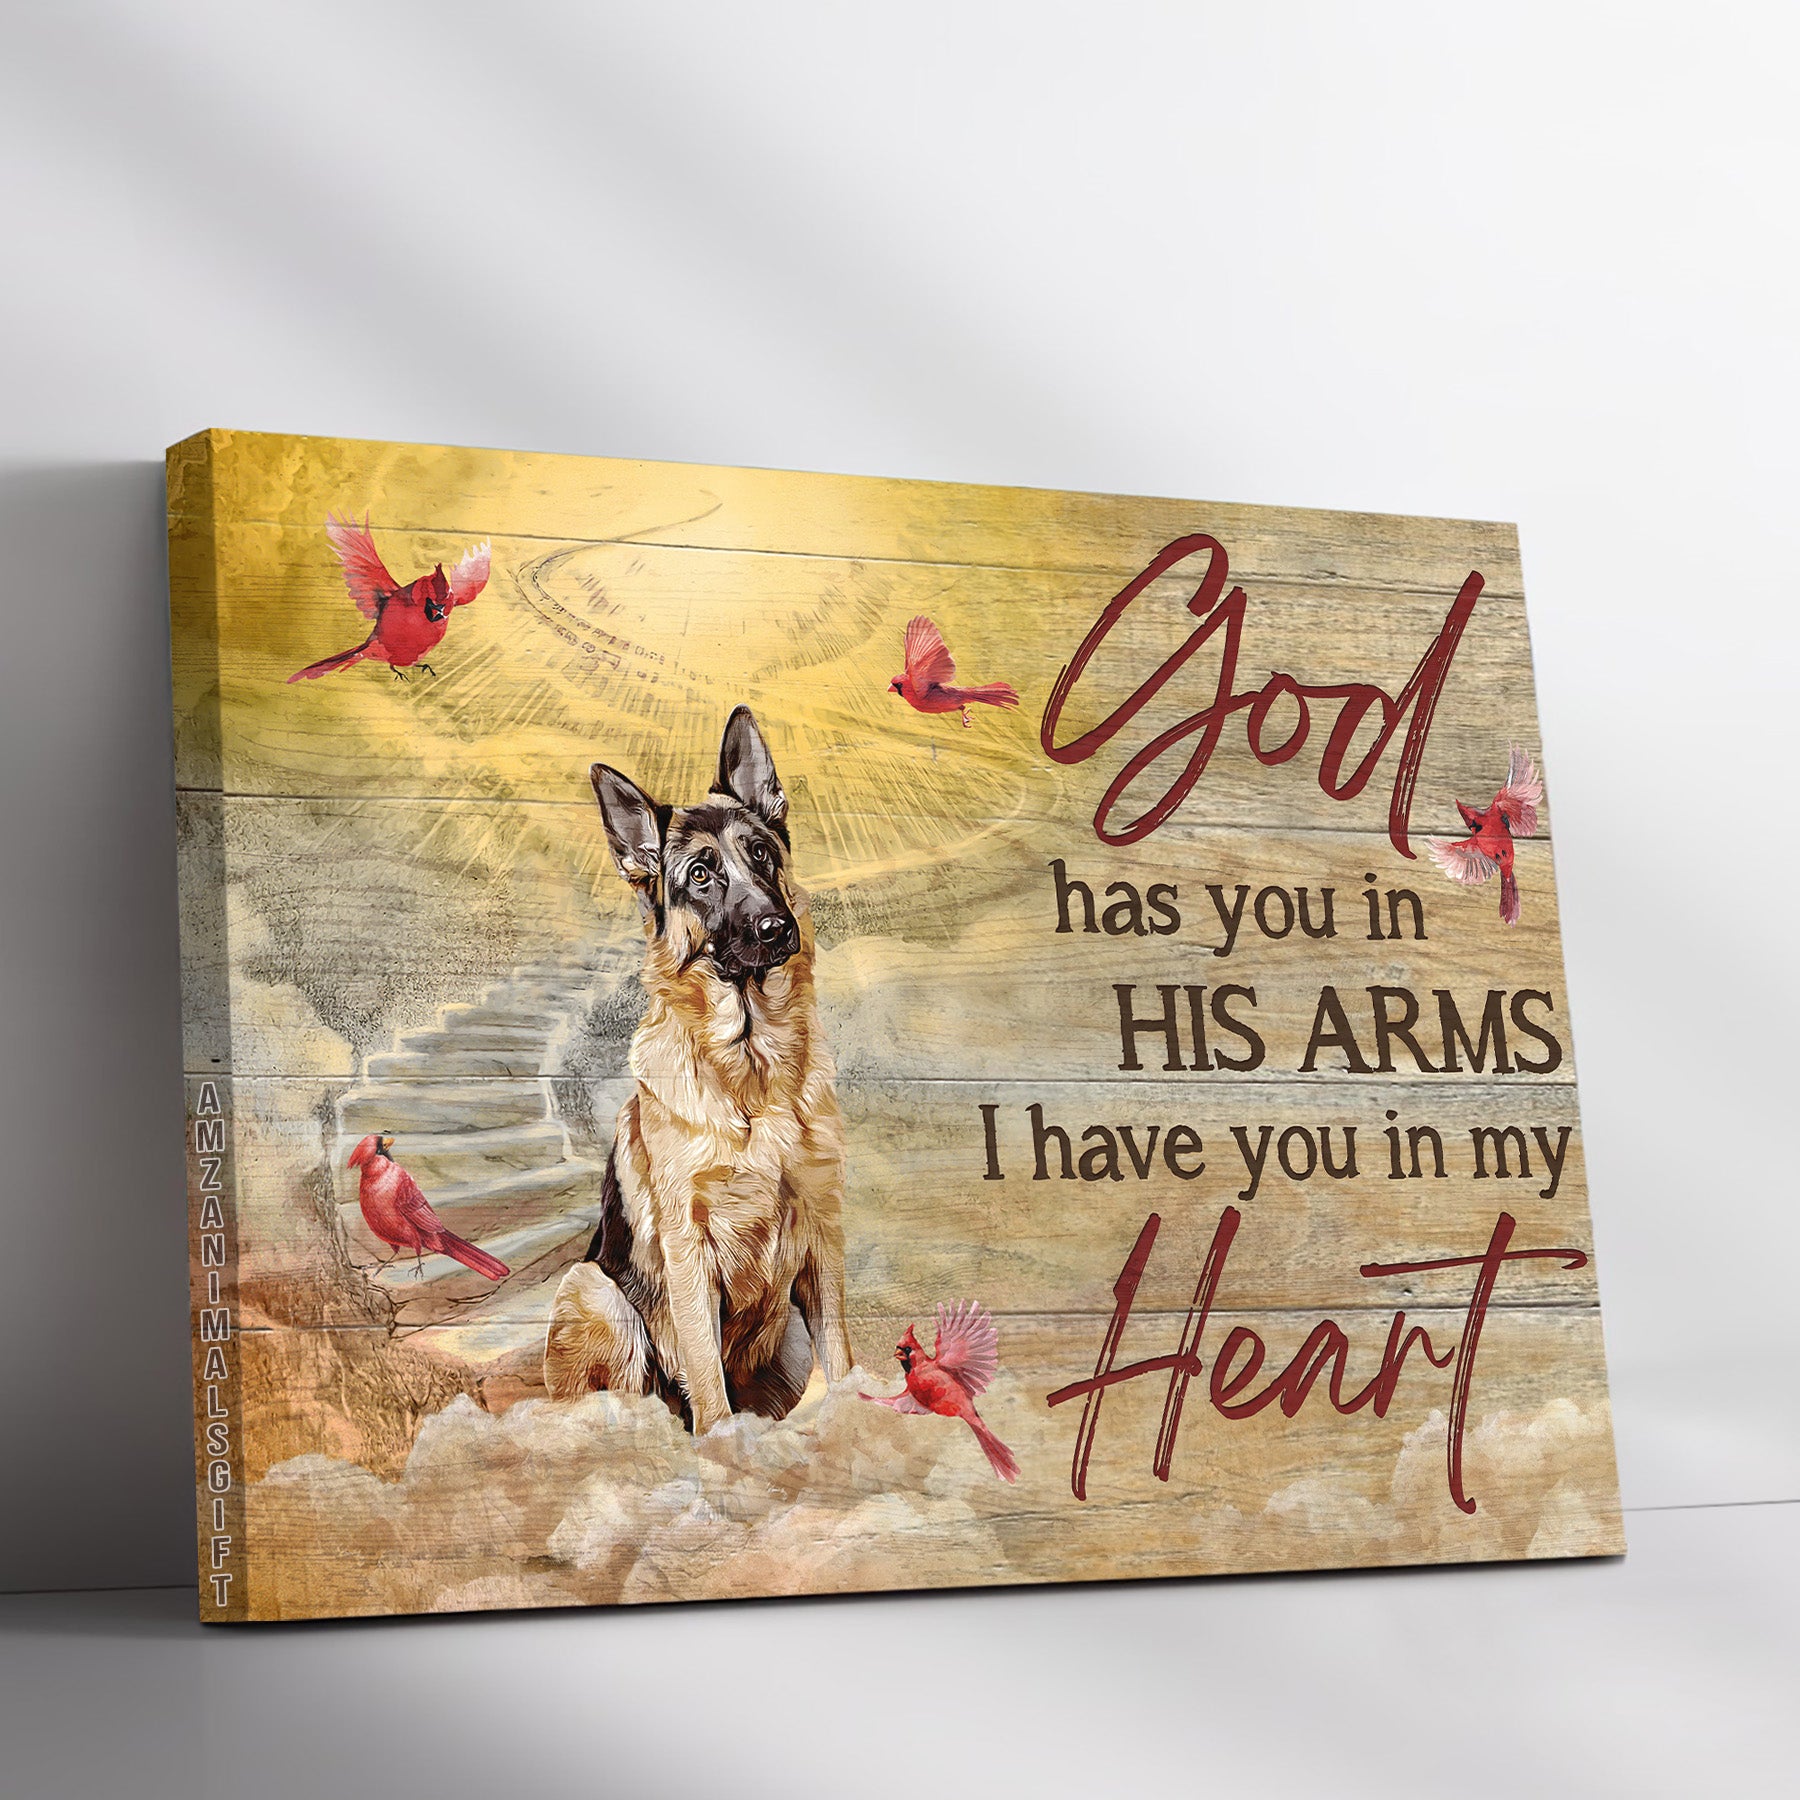 German Shepherd & Jesus Premium Wrapped Landscape Canvas -  German Shepherd, Red Cardinals, Heaven Sky, God Has You In His Arms - Gift For Christian